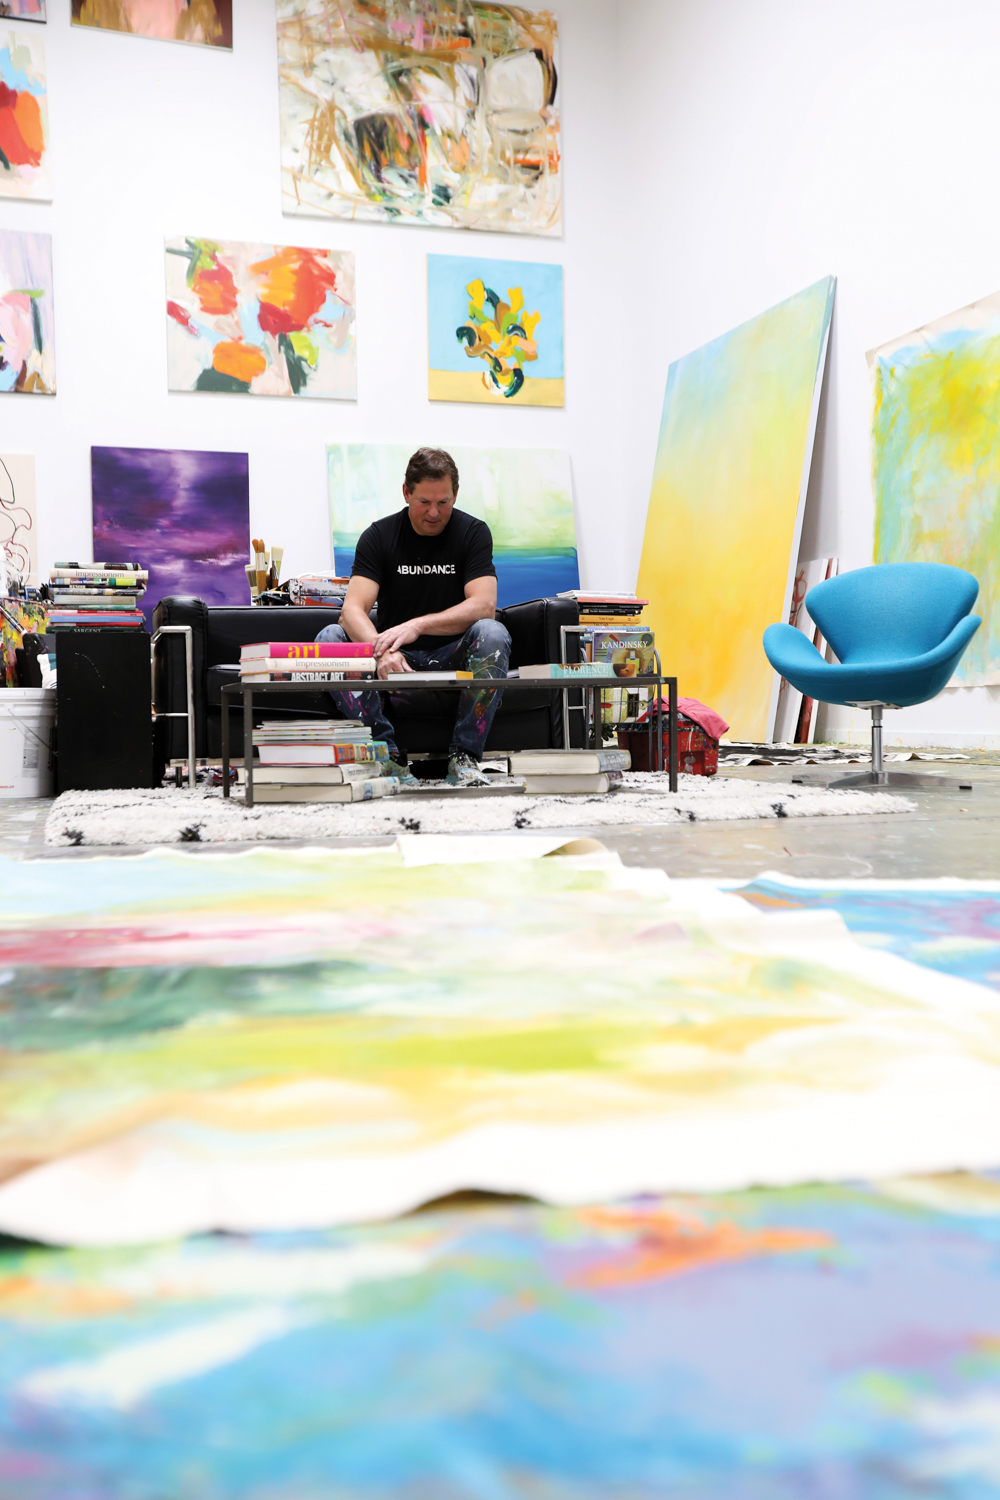 person sitting on couch in art studio, with a paint splattered canvas spread on the floor in front of them